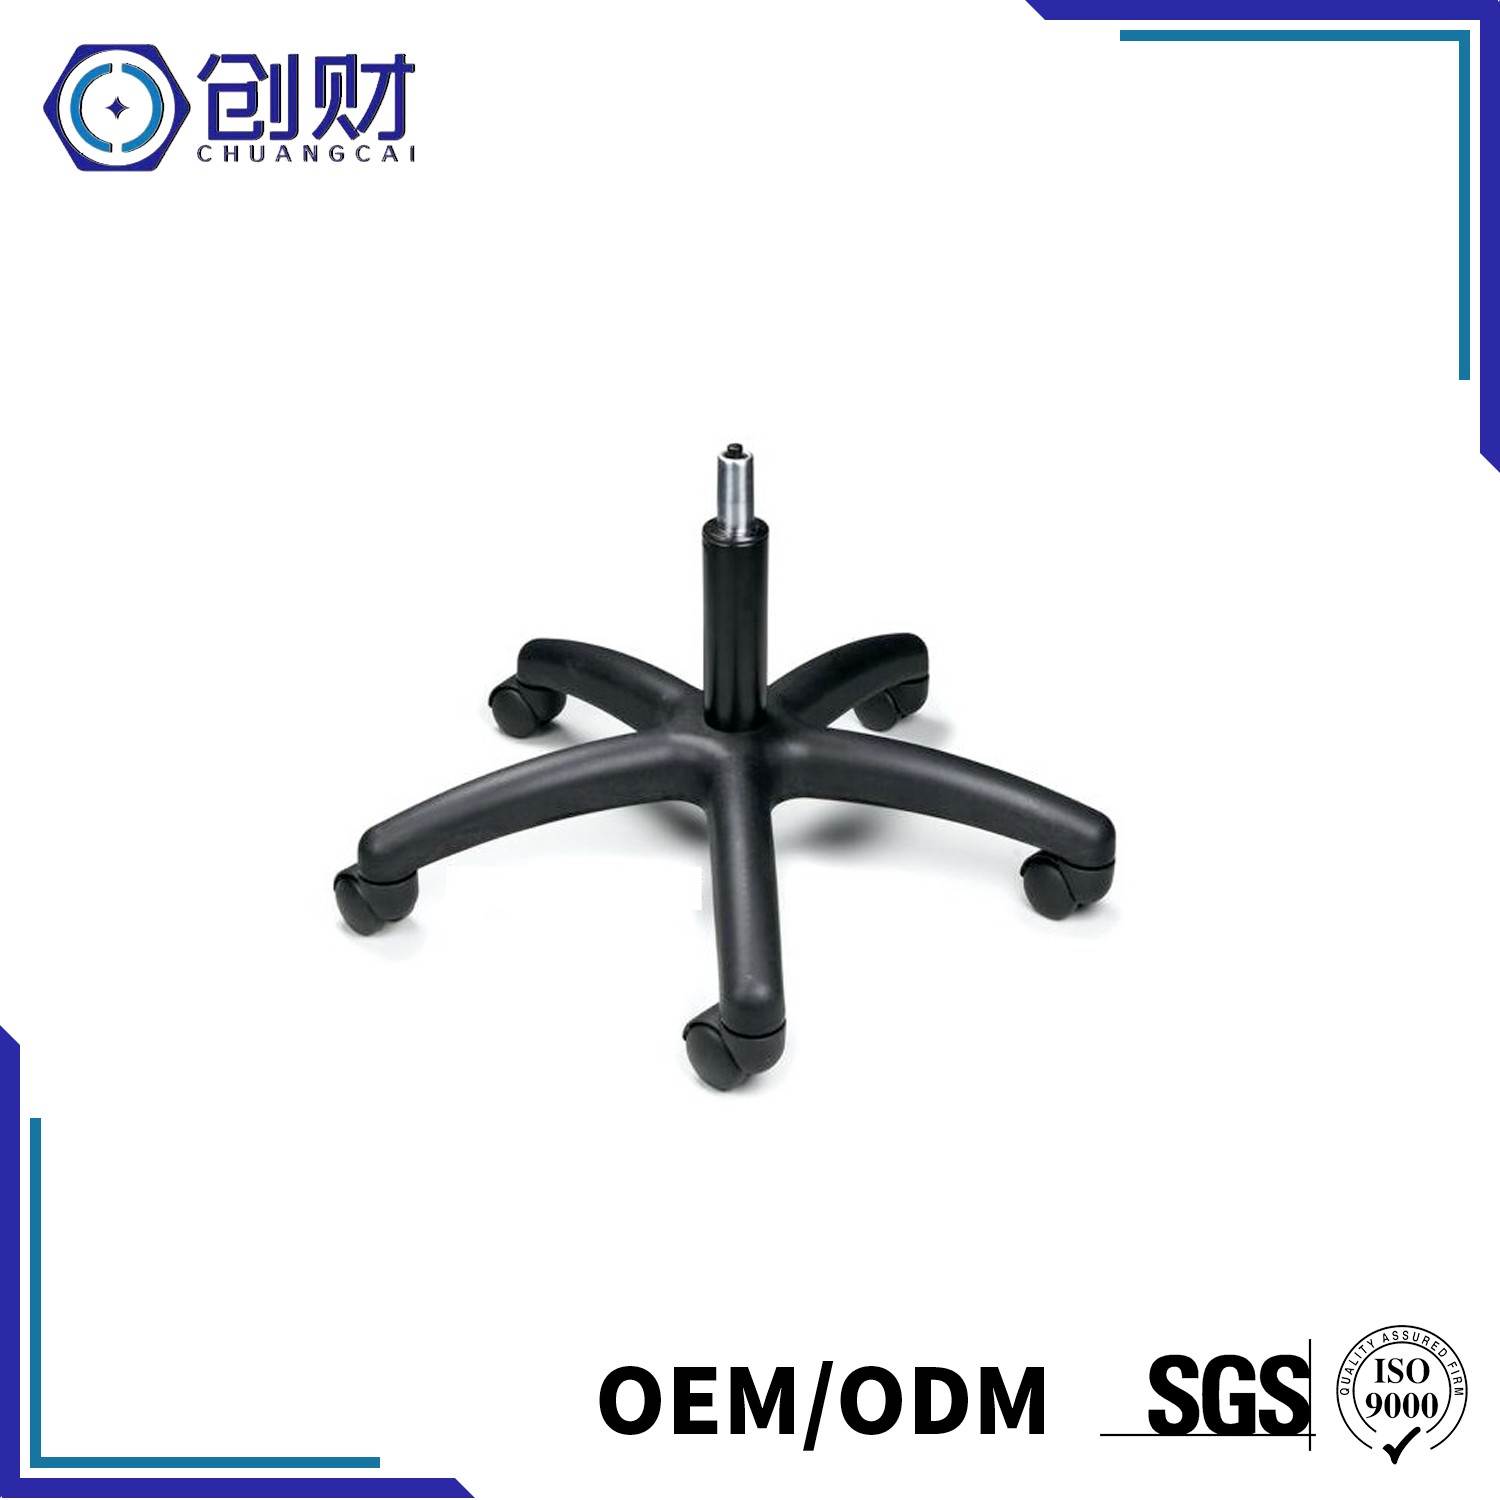 Gas Spring for Office Chair